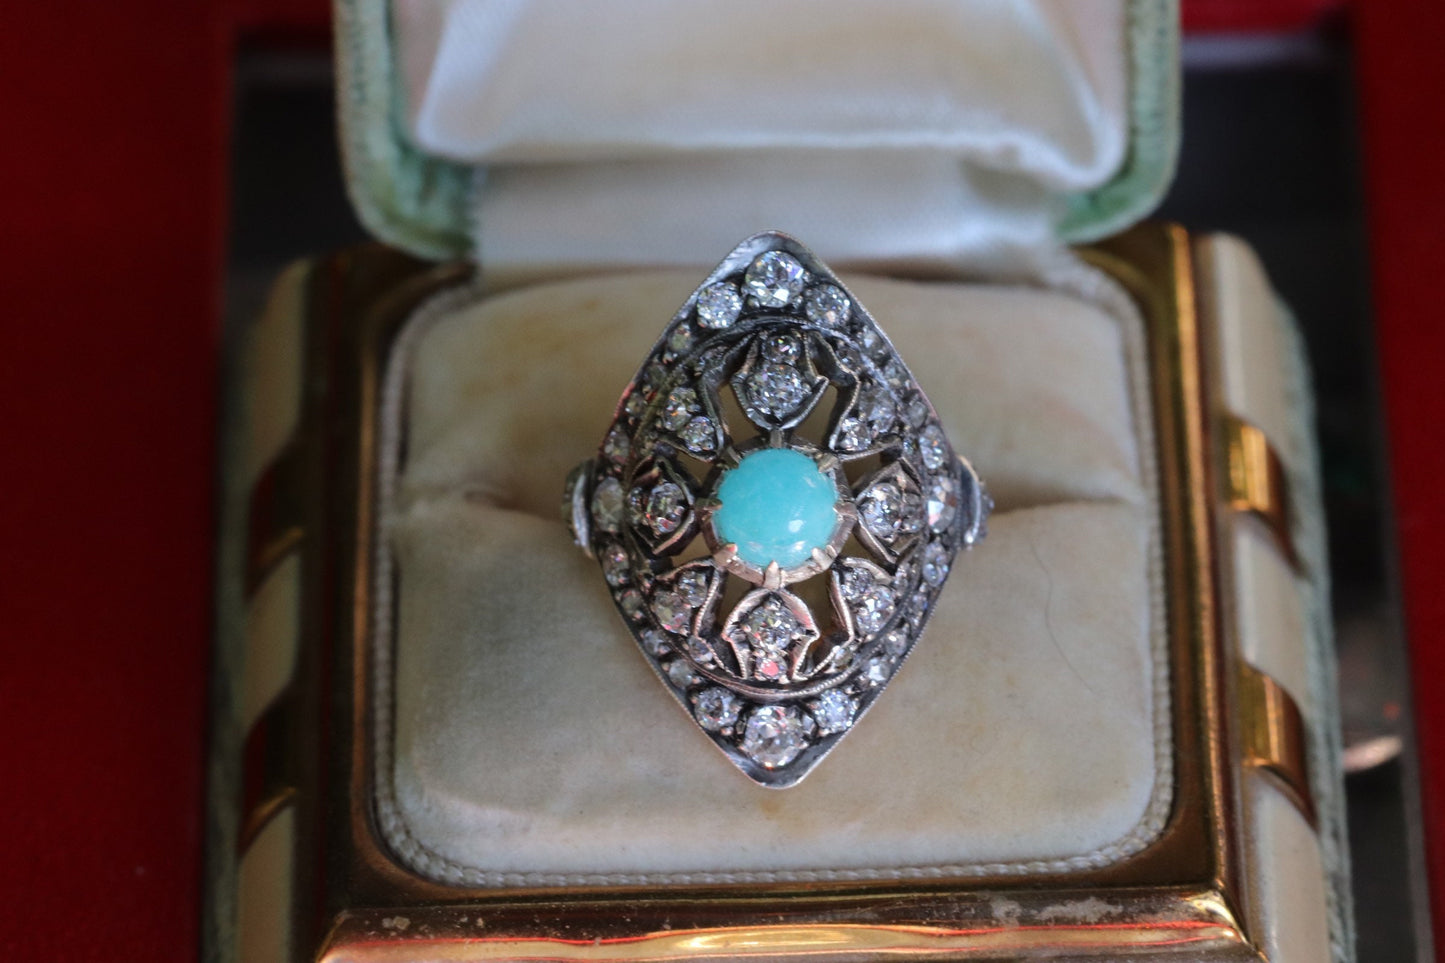 14k yellow gold silver topped Victorian reproduction ring set with old European diamonds and Paraiba tourmaline size 8 (sizable within 2)